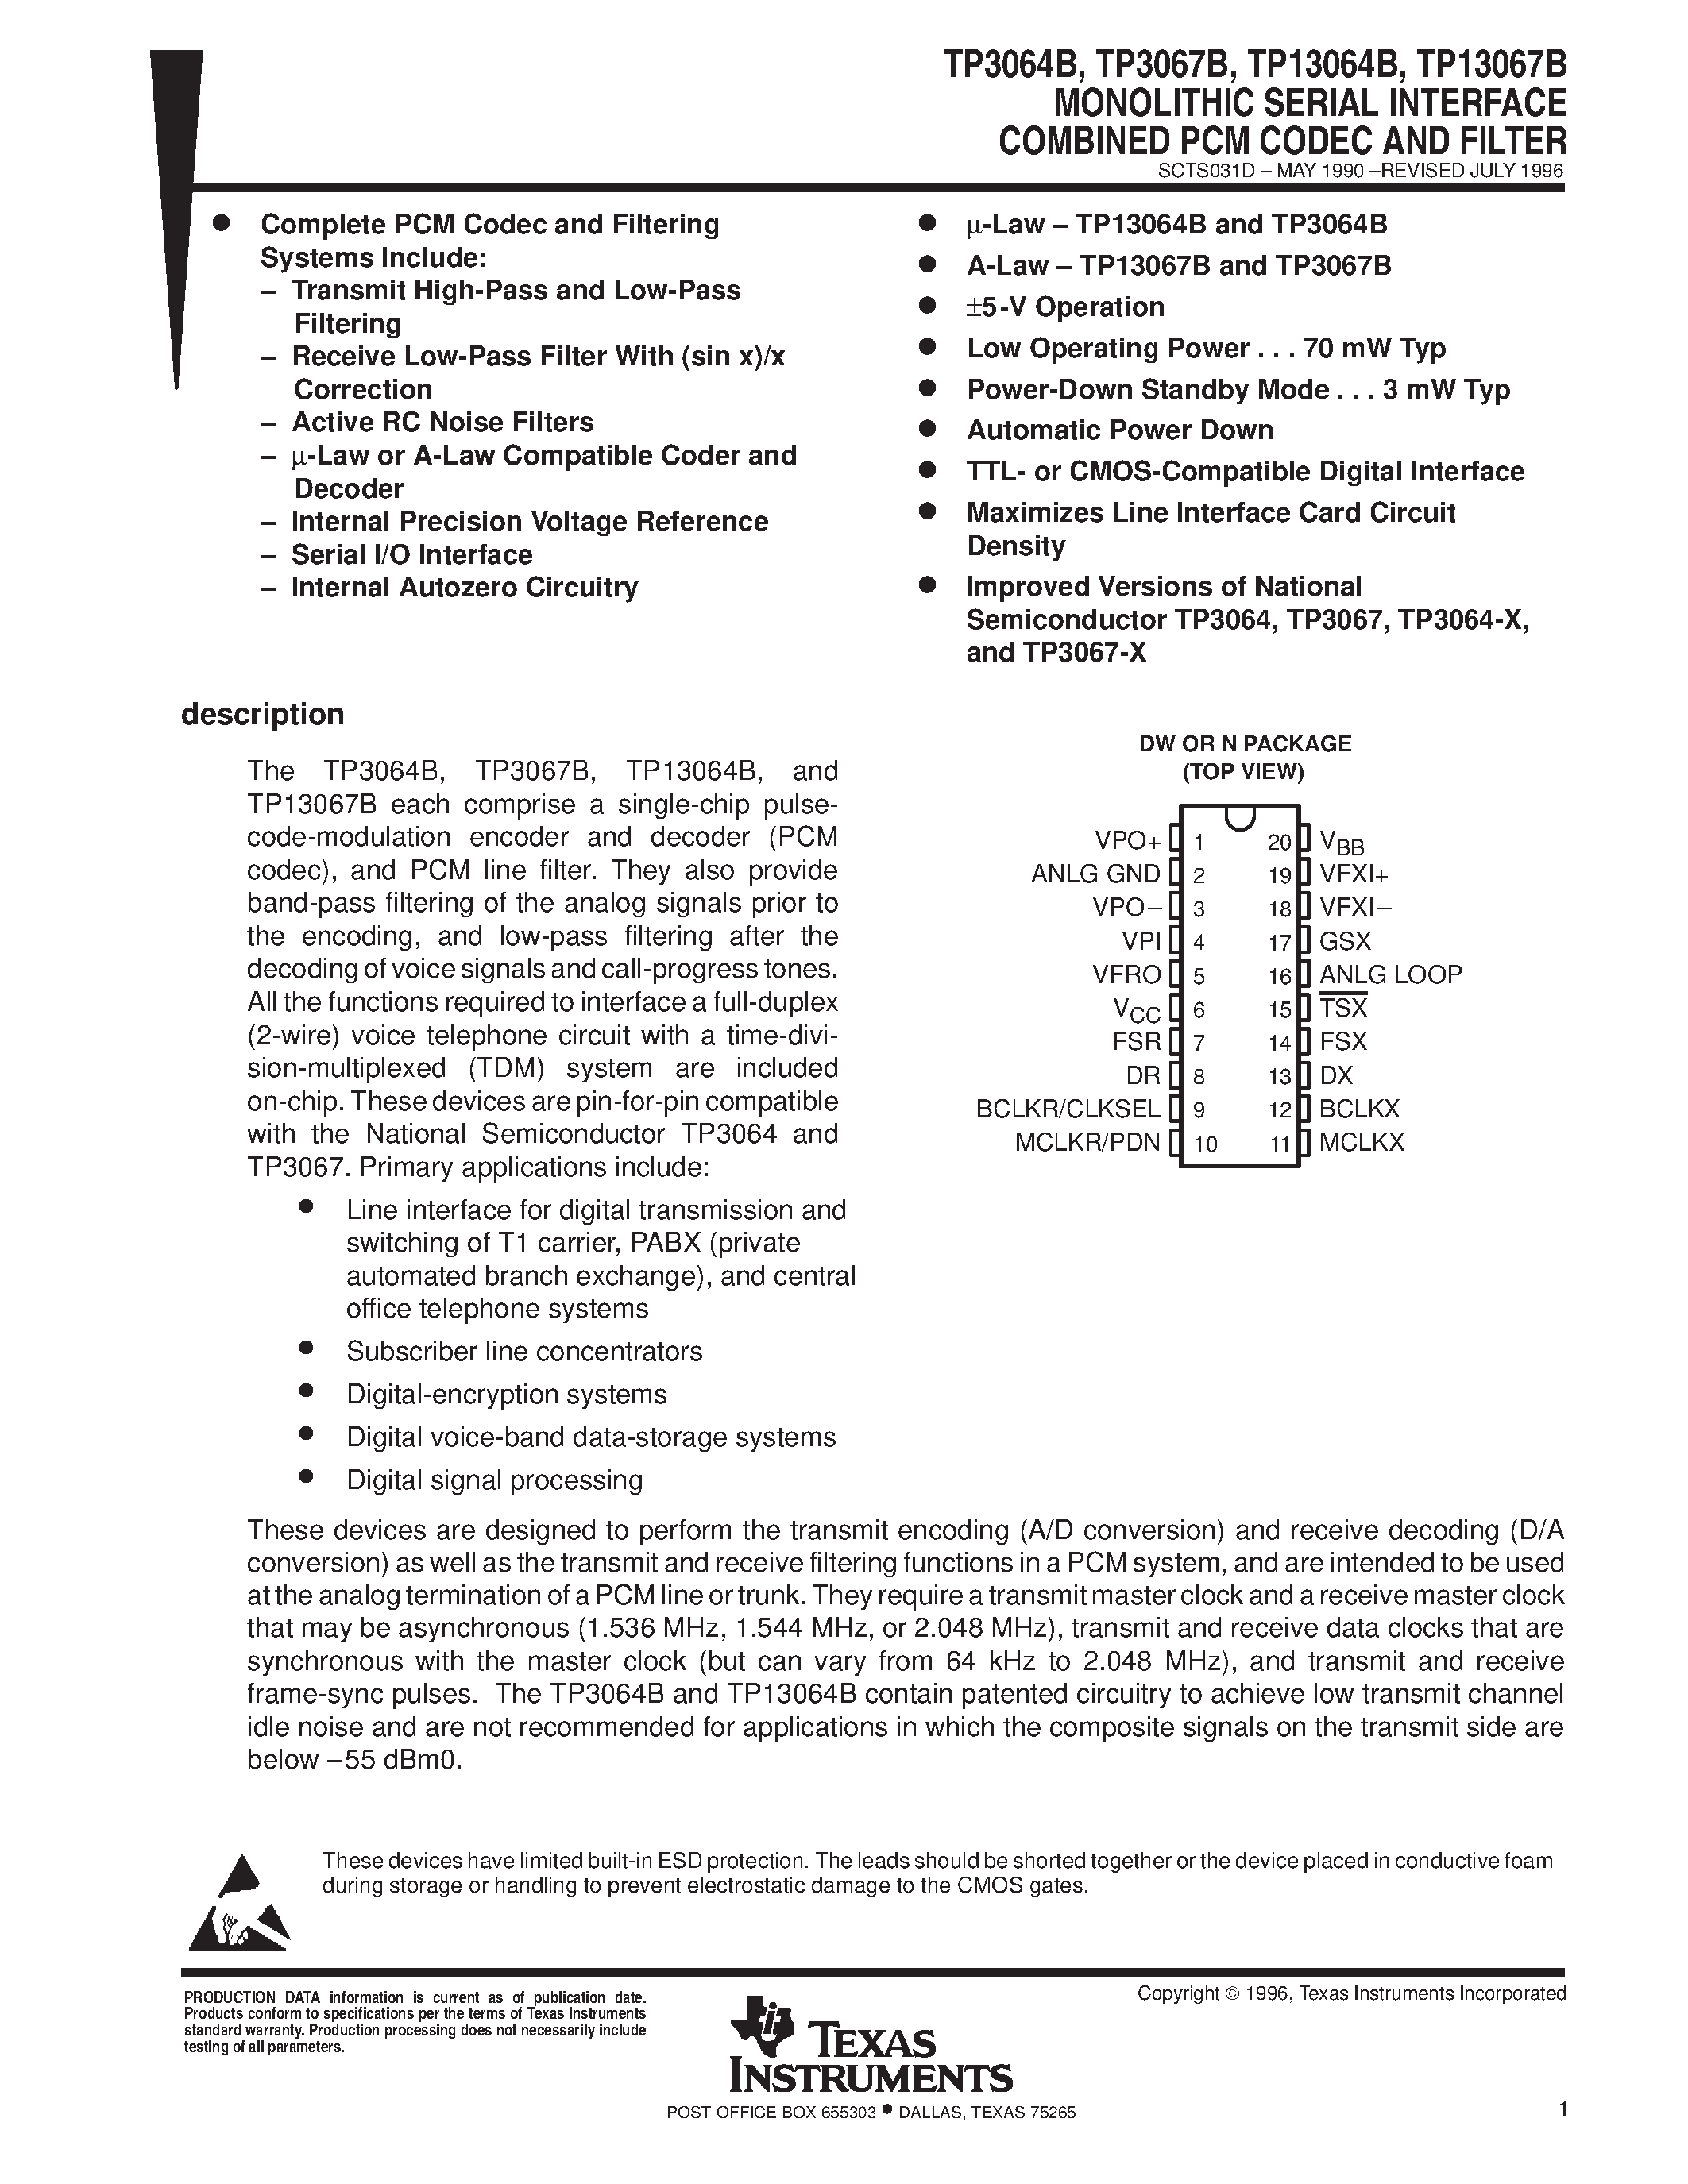 Datasheet TP13067BDW - MONOLITHIC SERIAL INTERFACE COMBINED PCM CODEC AND FILTER page 1